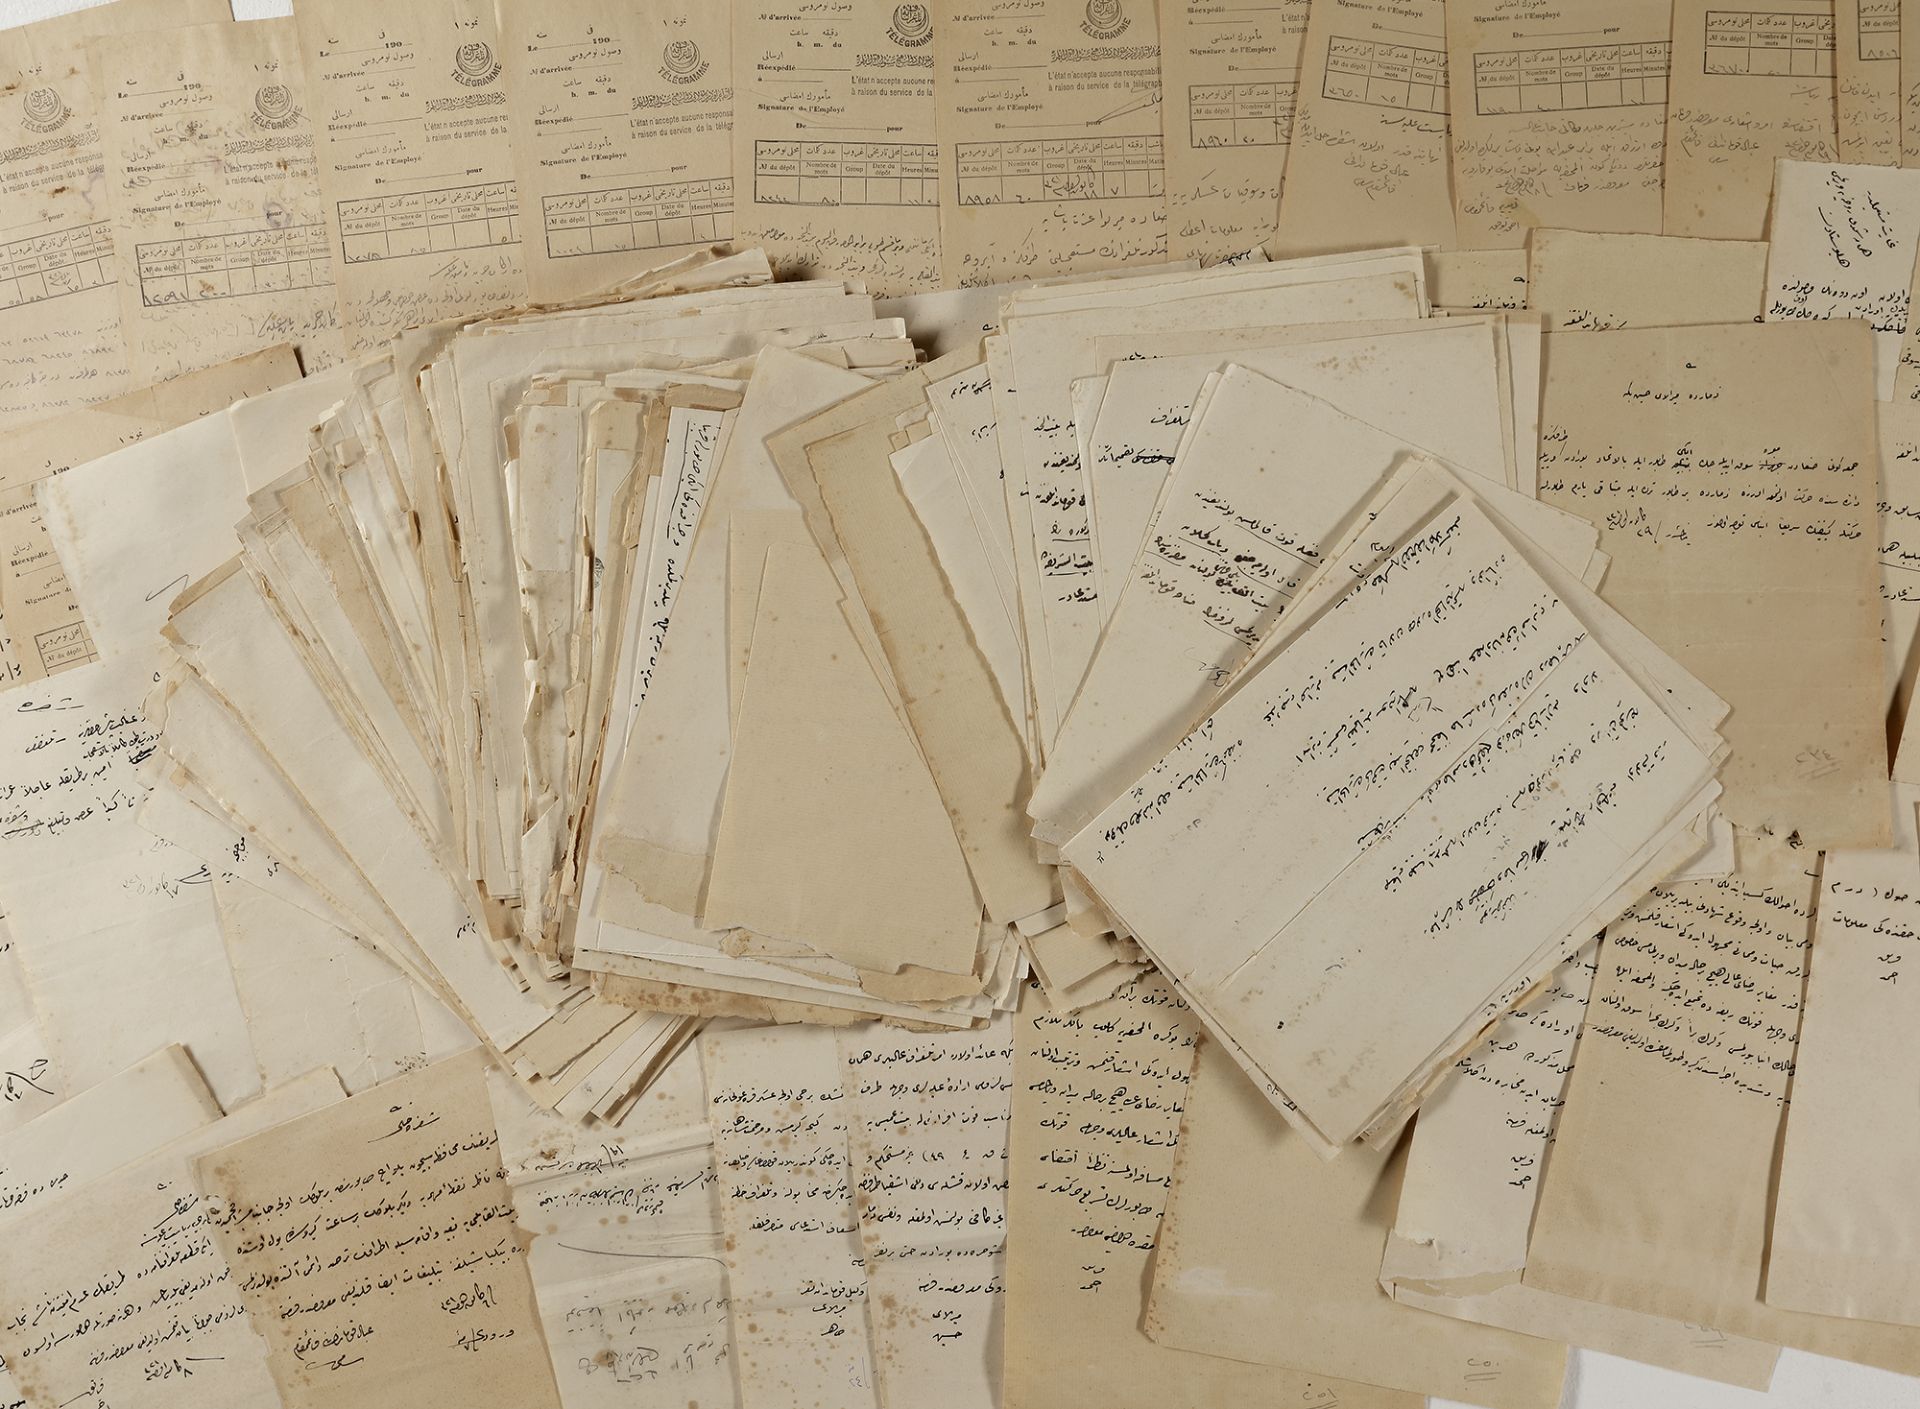 A RARE ARCHIVE ABOUT YEMEN, BELONGED TO AHMED IZZET PASHA